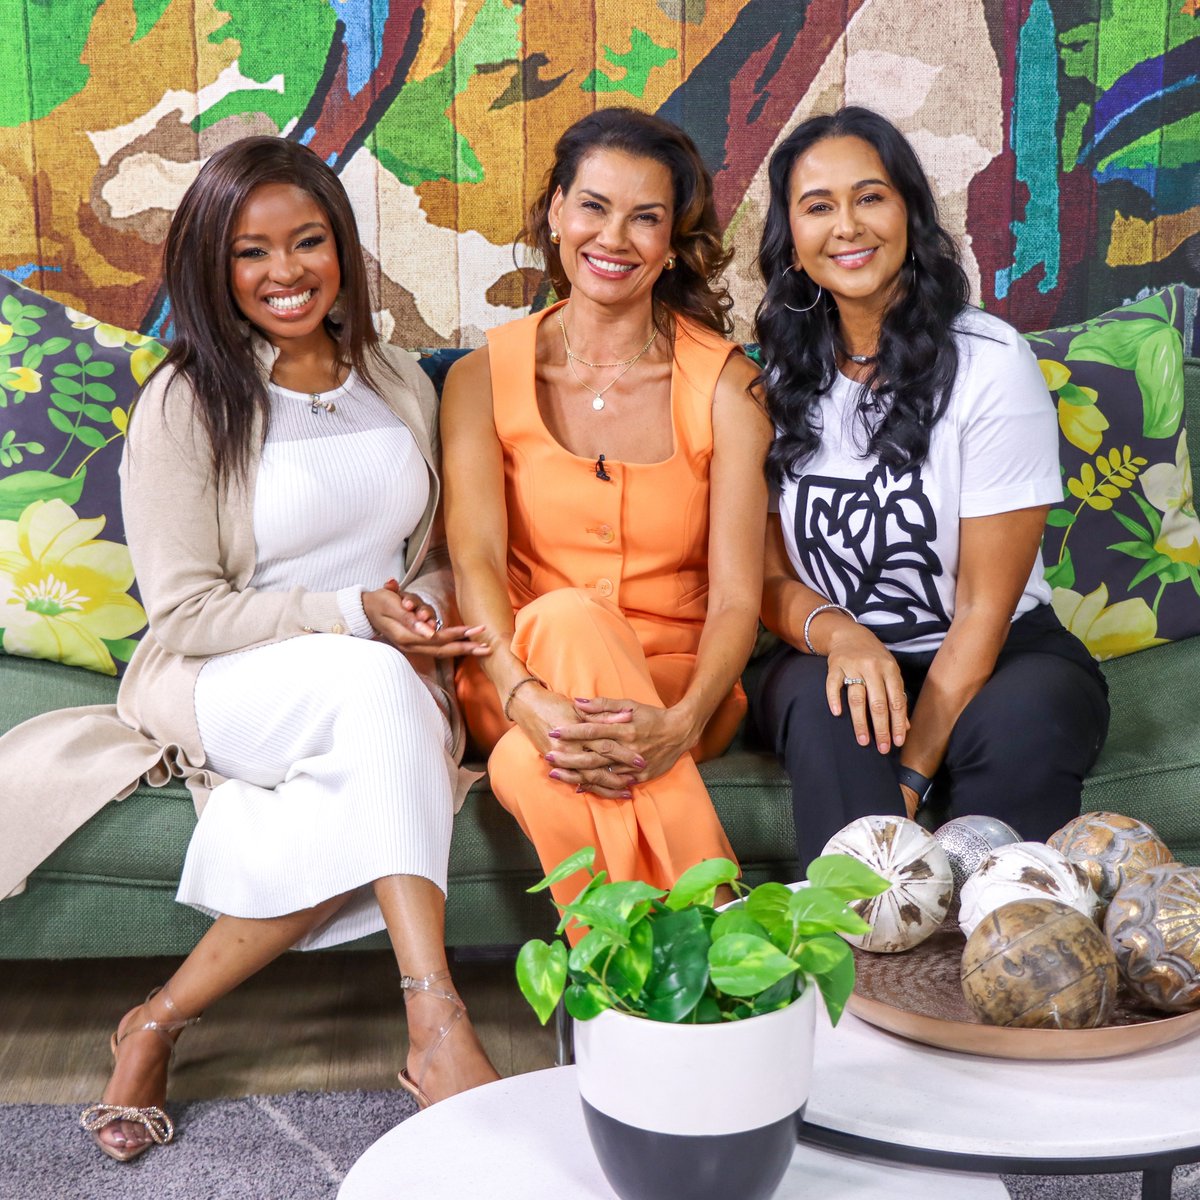 Having a bad day at work? 😢 Try these strategies:  

Take a break
Evaluate the day
Talk to someone
Write about your day
End the day with a positive mindset 
#AfternoonExpress